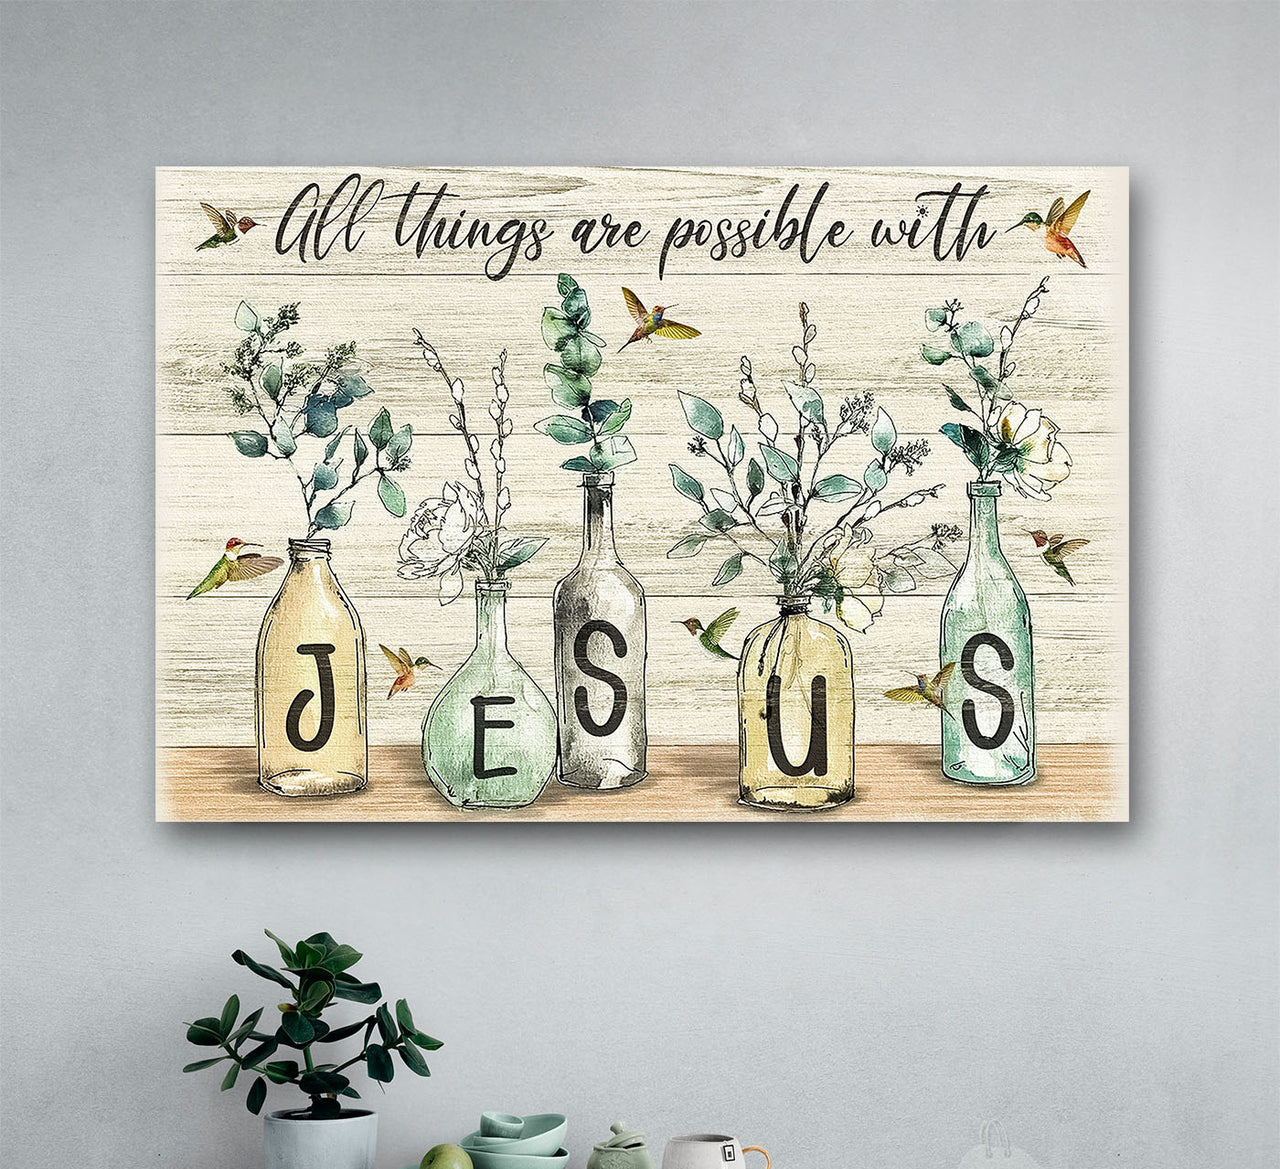 Christian All Things Are Possible With Jesus Wall Art Decor Poster Canvas